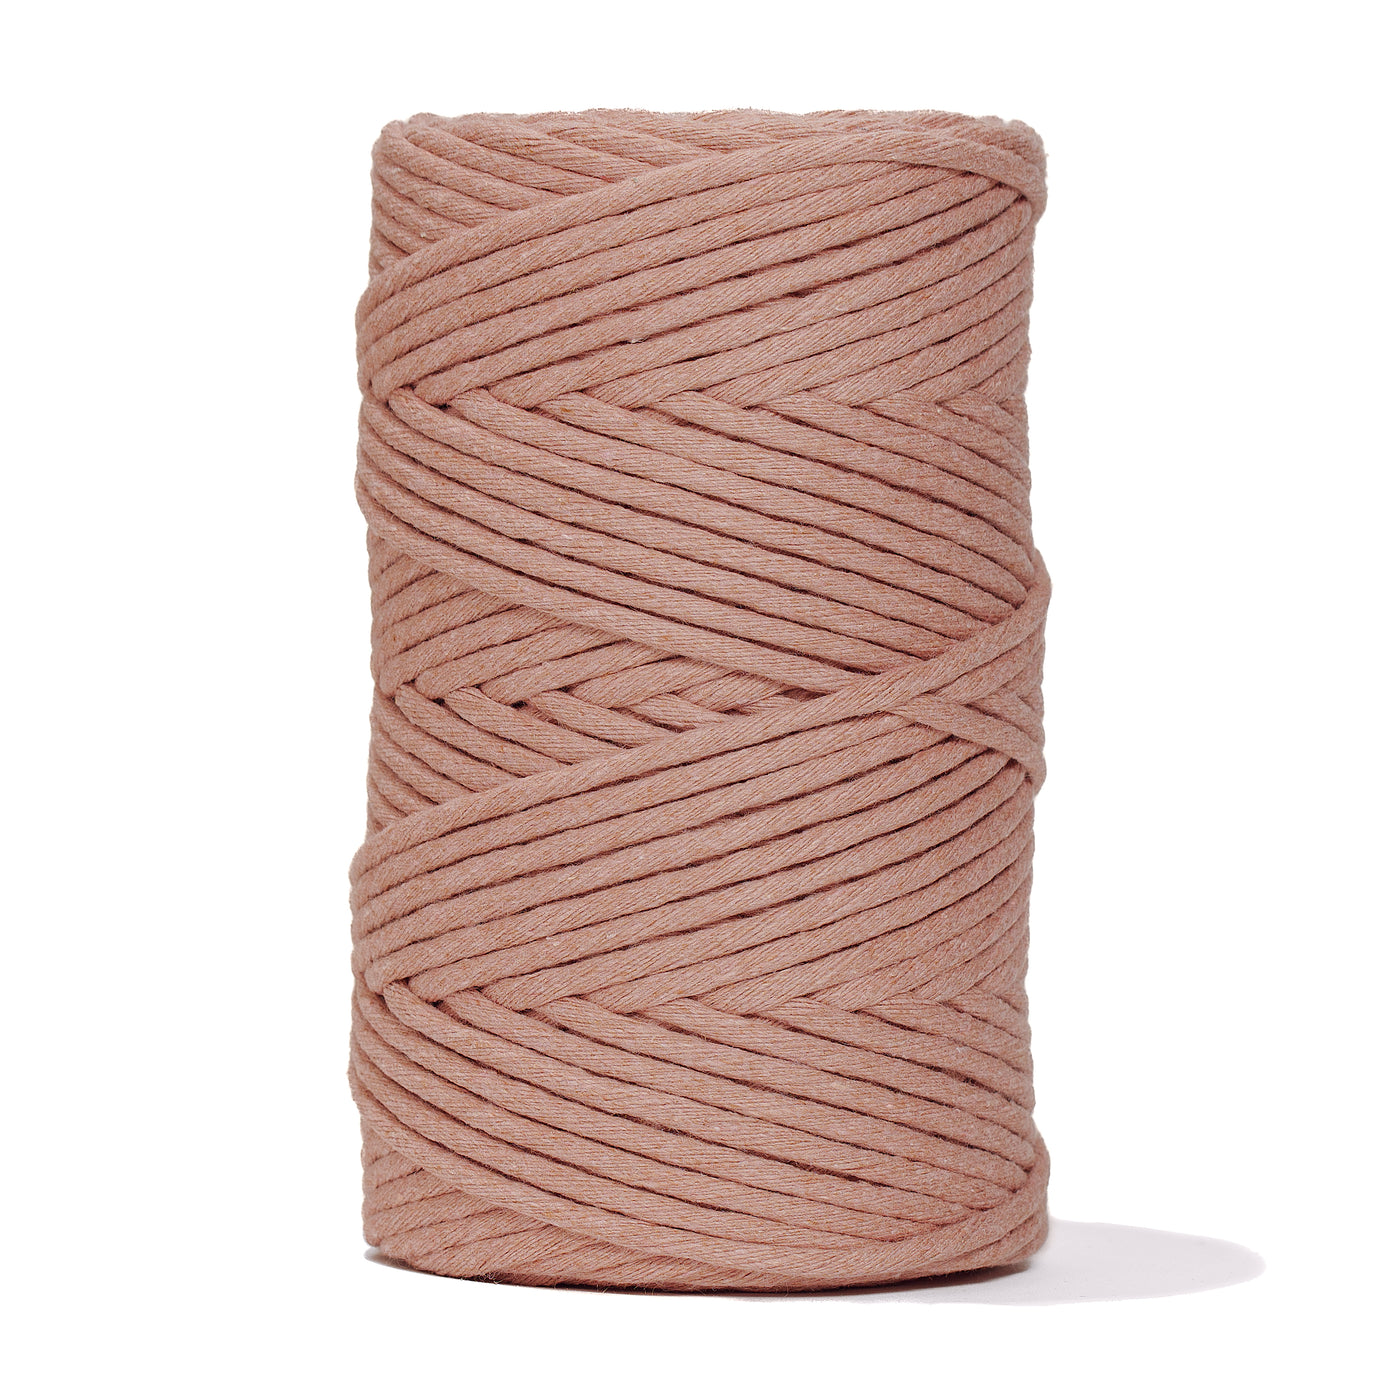 MACRAME SOFT COTTON CORD RECYCLED 4 MM - 1 SINGLE STRAND - DUSTY ROSE COLOR  GANXXET